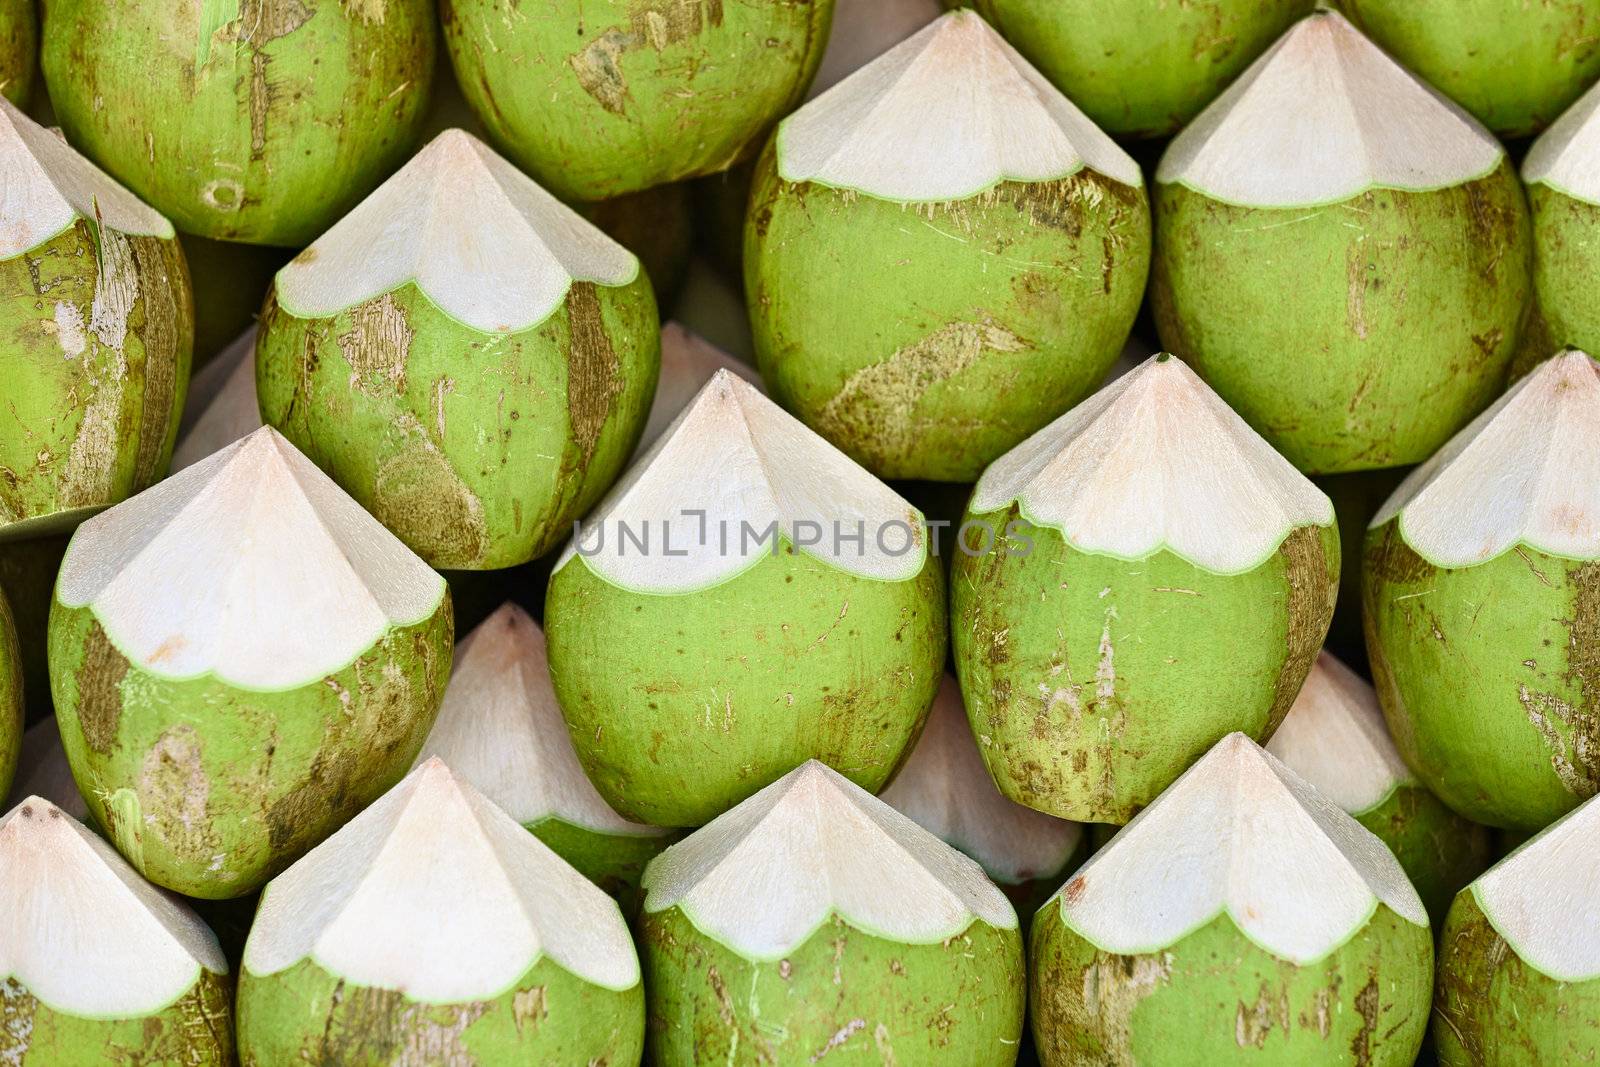 Coconuts are ready to sell - the background